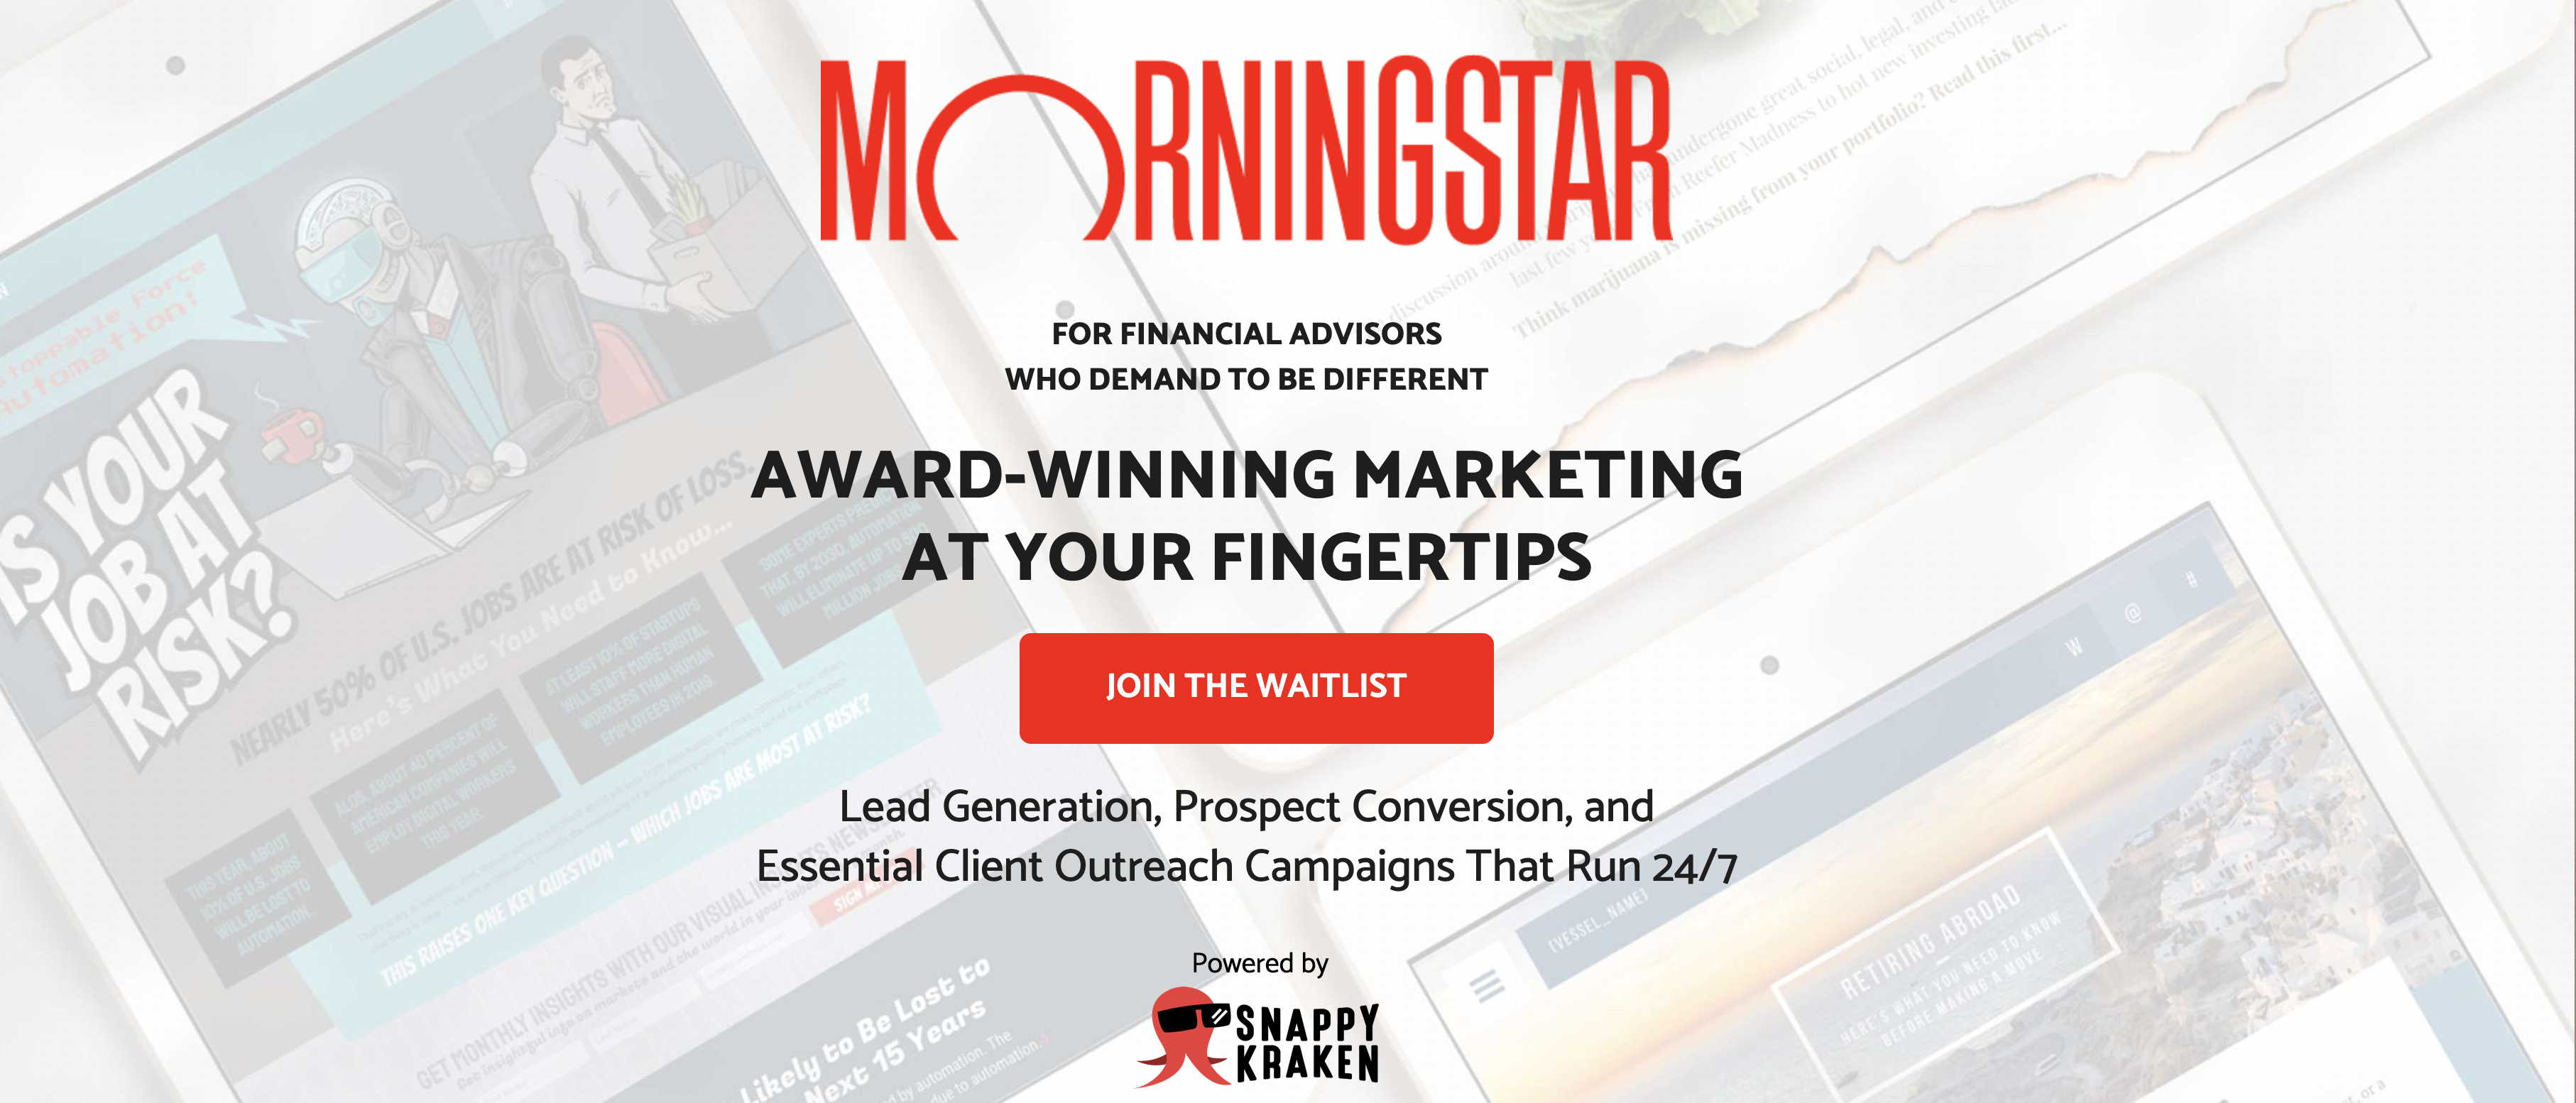 [NEWS] Snappy Kraken Announces Collaboration with Morningstar Wealth to Elevate Advisor-Client Interactions